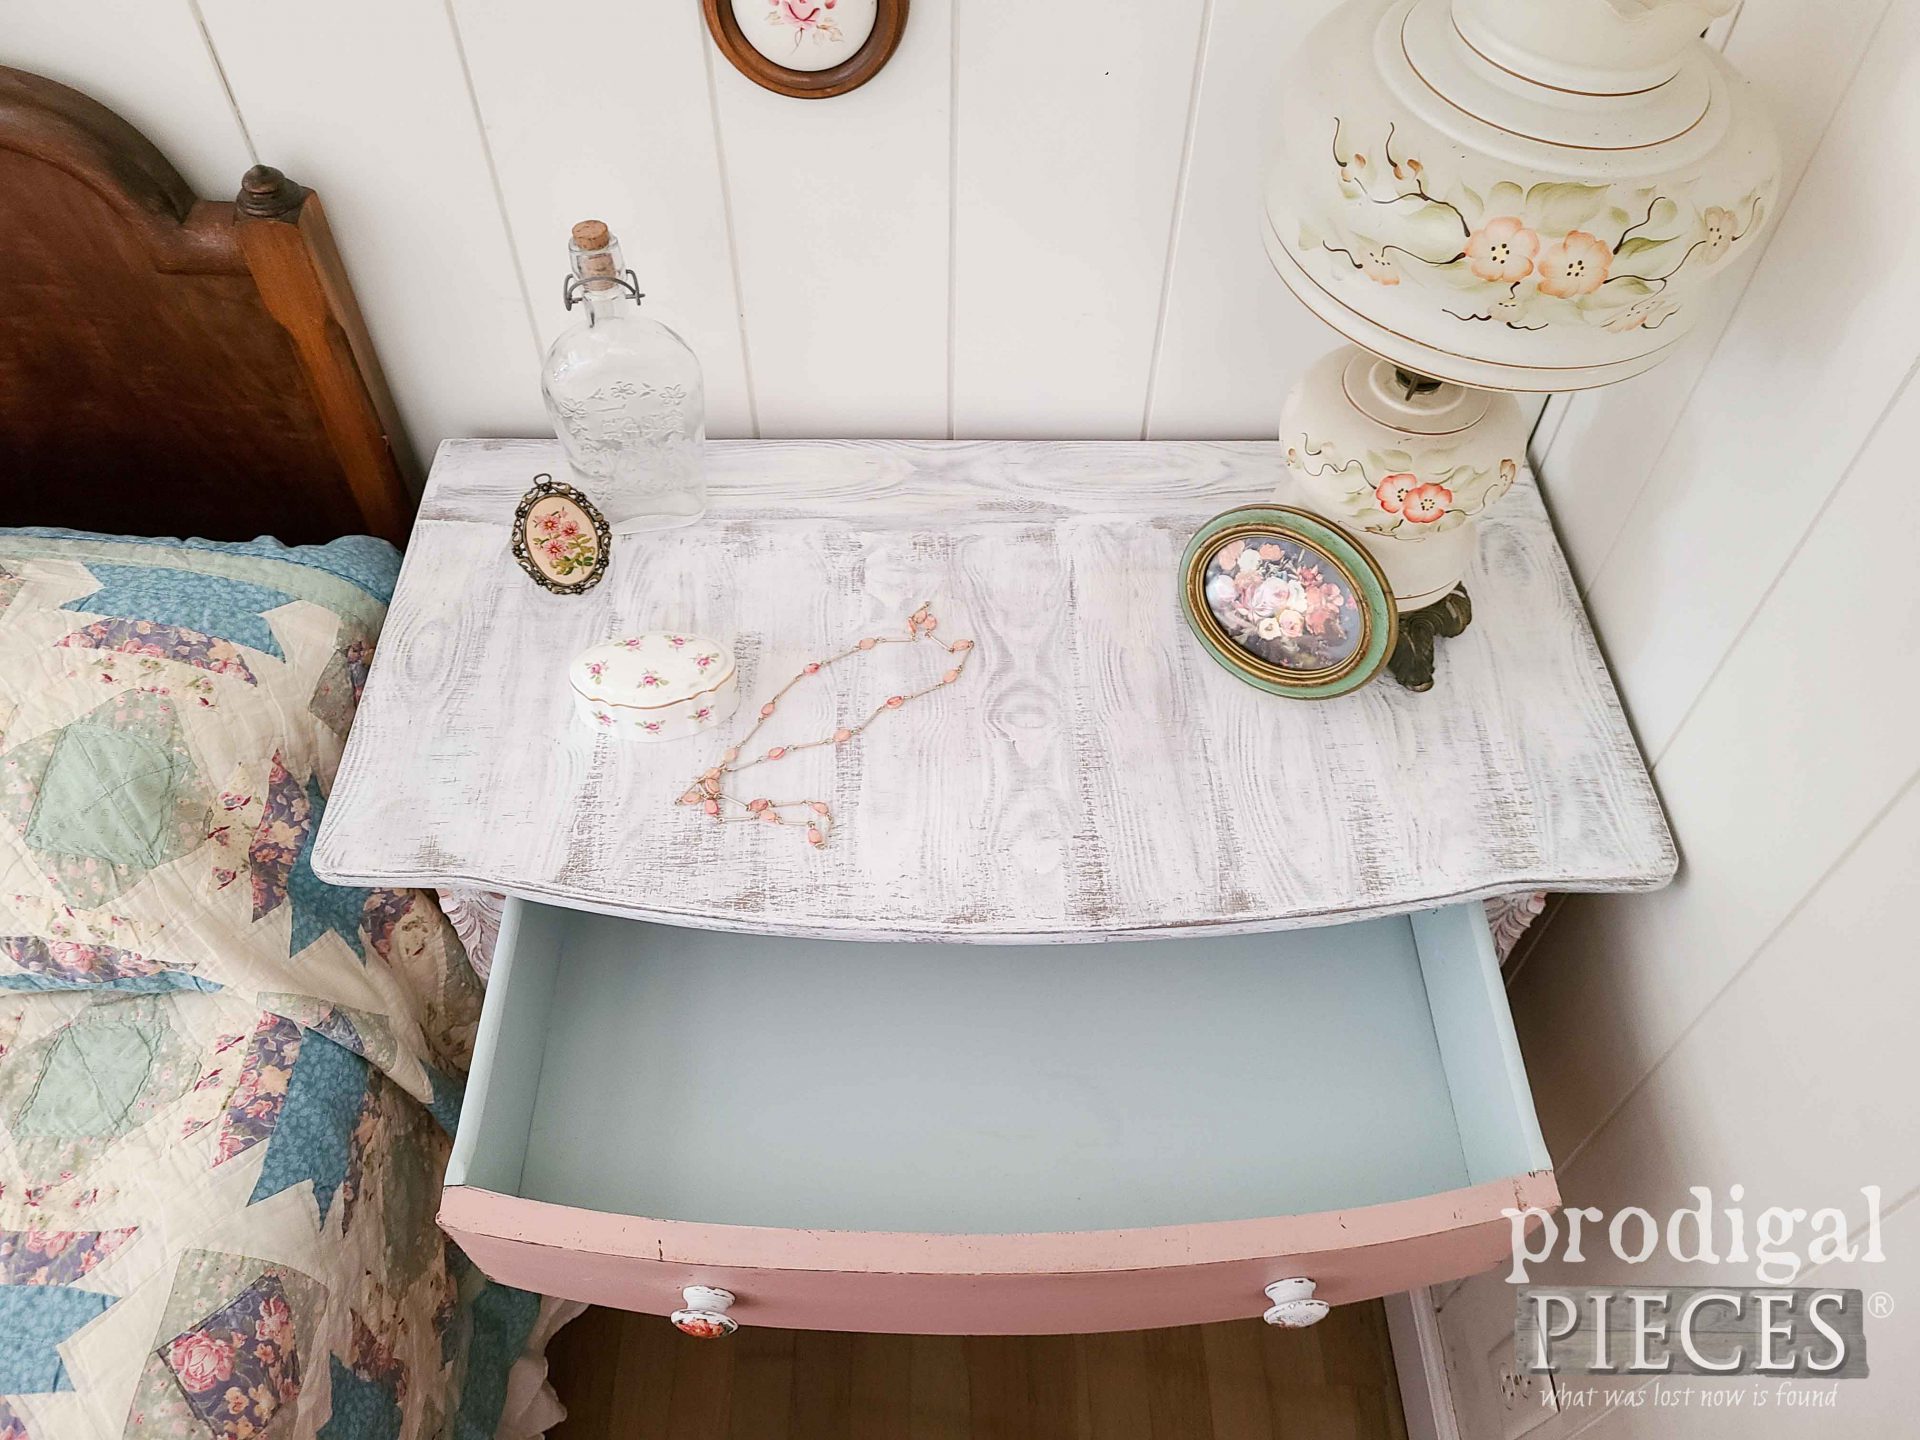 Open Drawer on Wash Stand by Prodigal Pieces | prodigalpieces.com #prodigalpieces #antique #home #diy #furniture